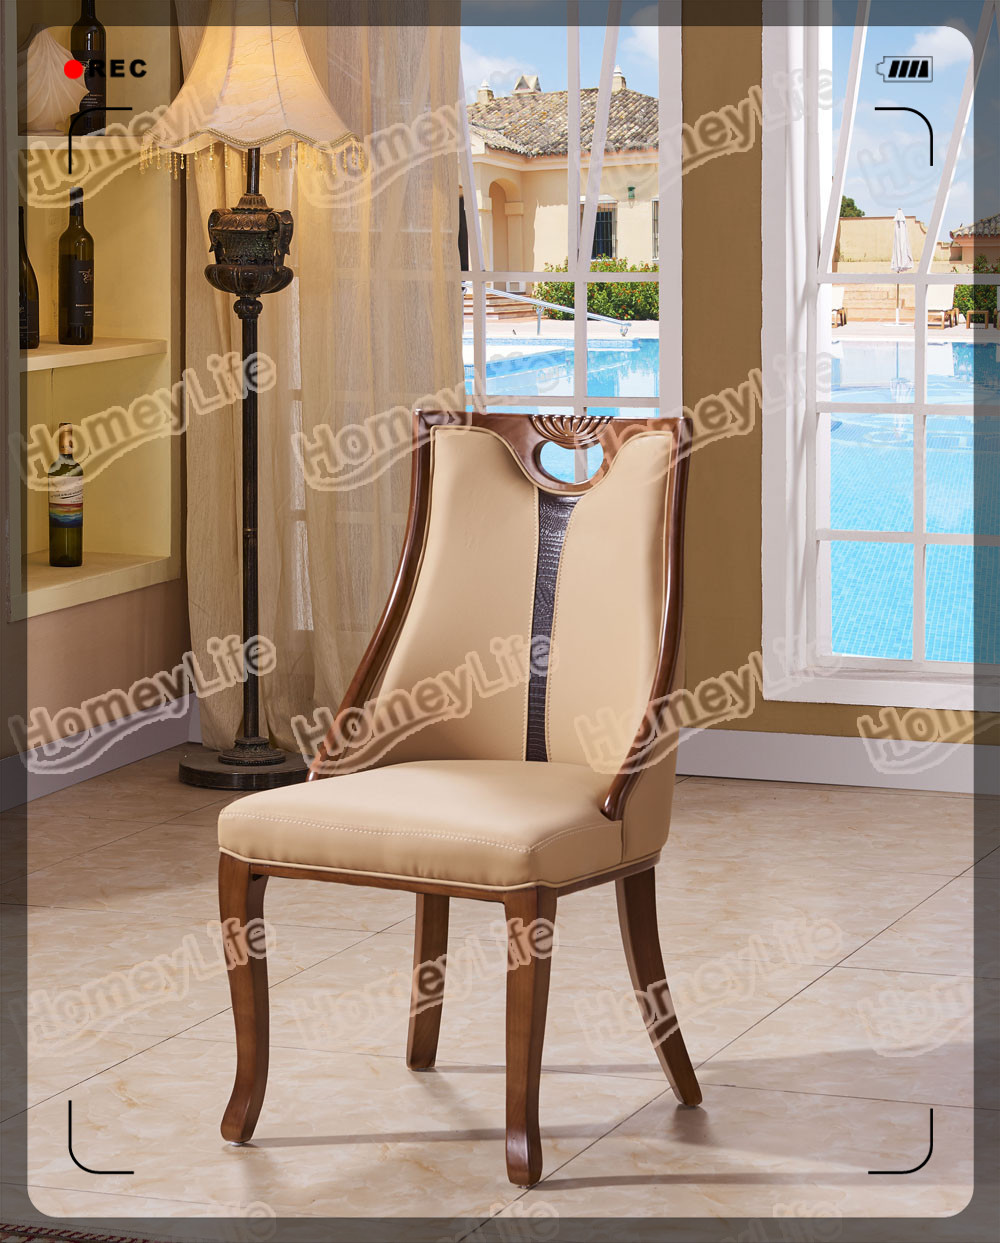 solid wood frame with PU leather cushion dining chair